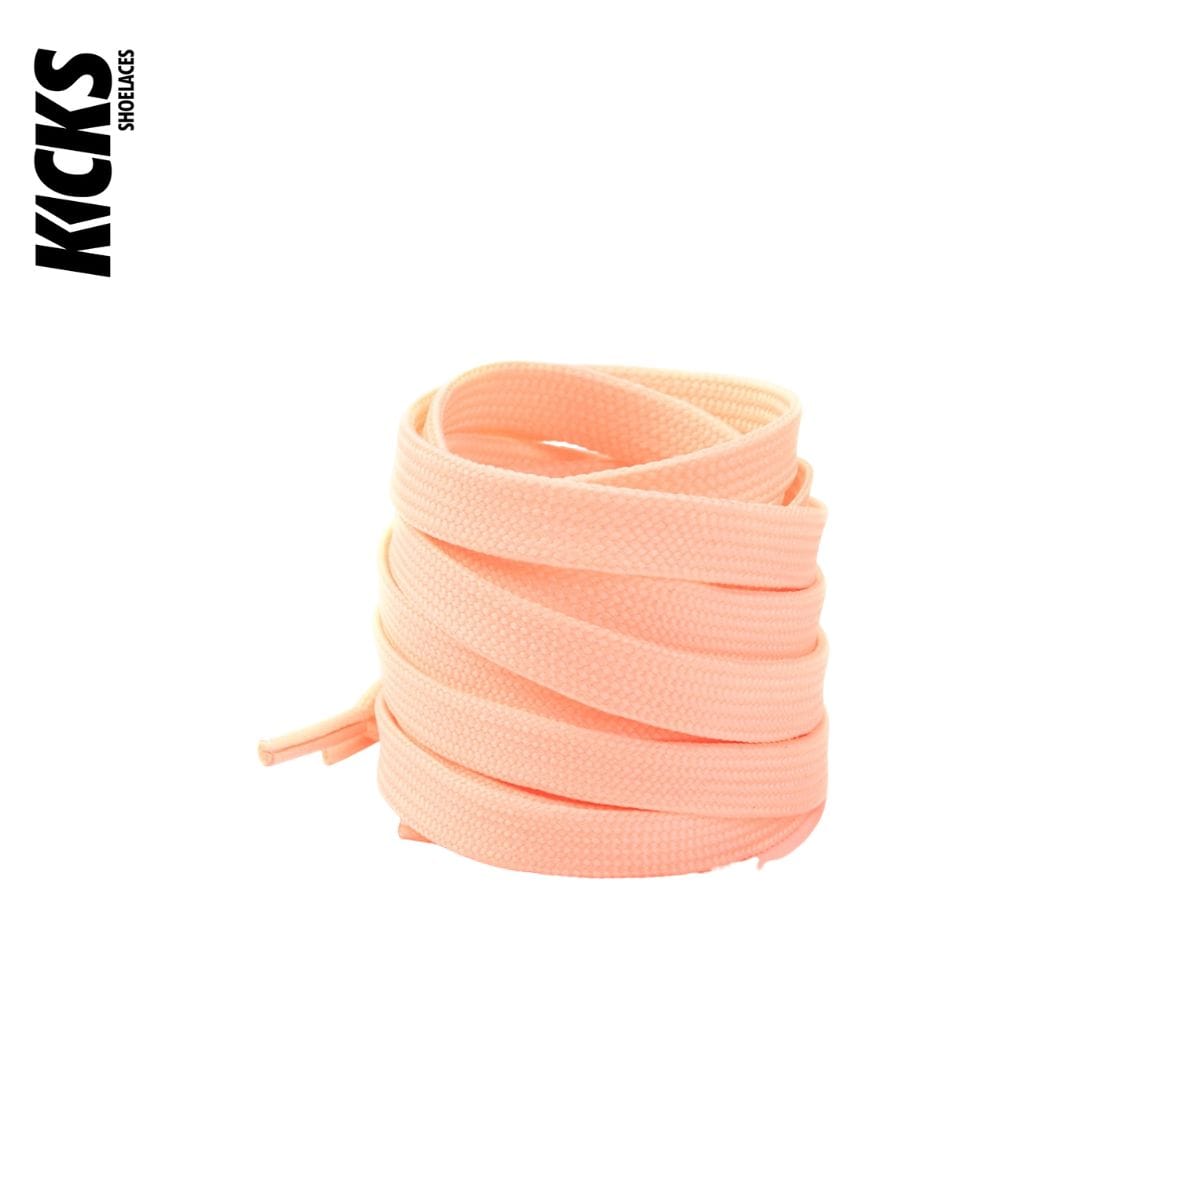 Peach Replacement Laces for Adidas EQT Sneakers by Kicks Shoelaces